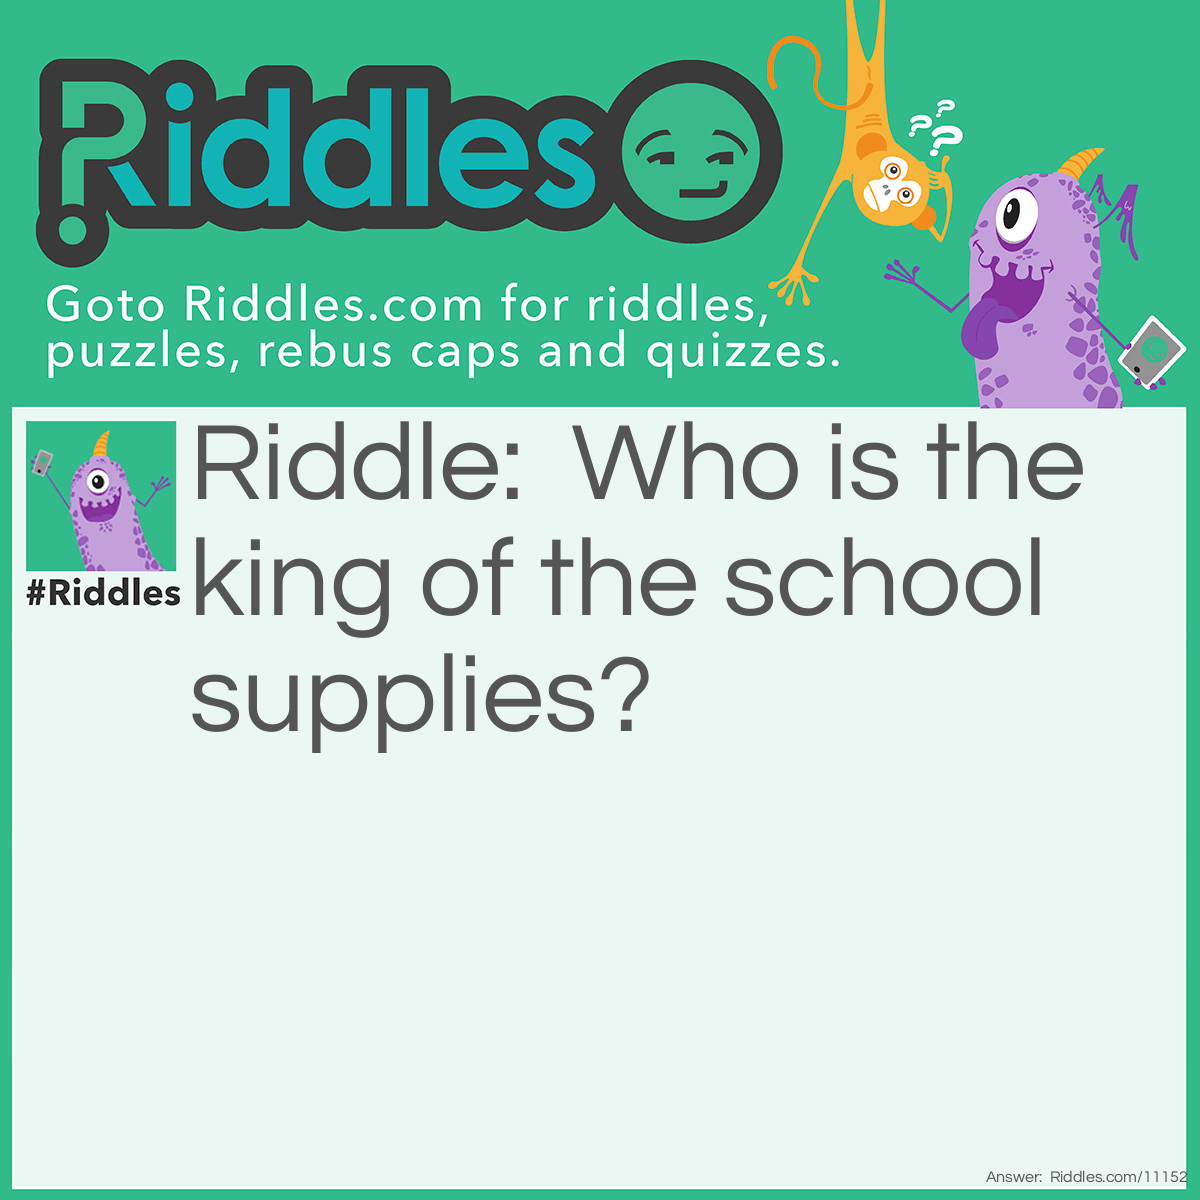 Riddle: Who is the king of the school supplies? Answer: The ruler.